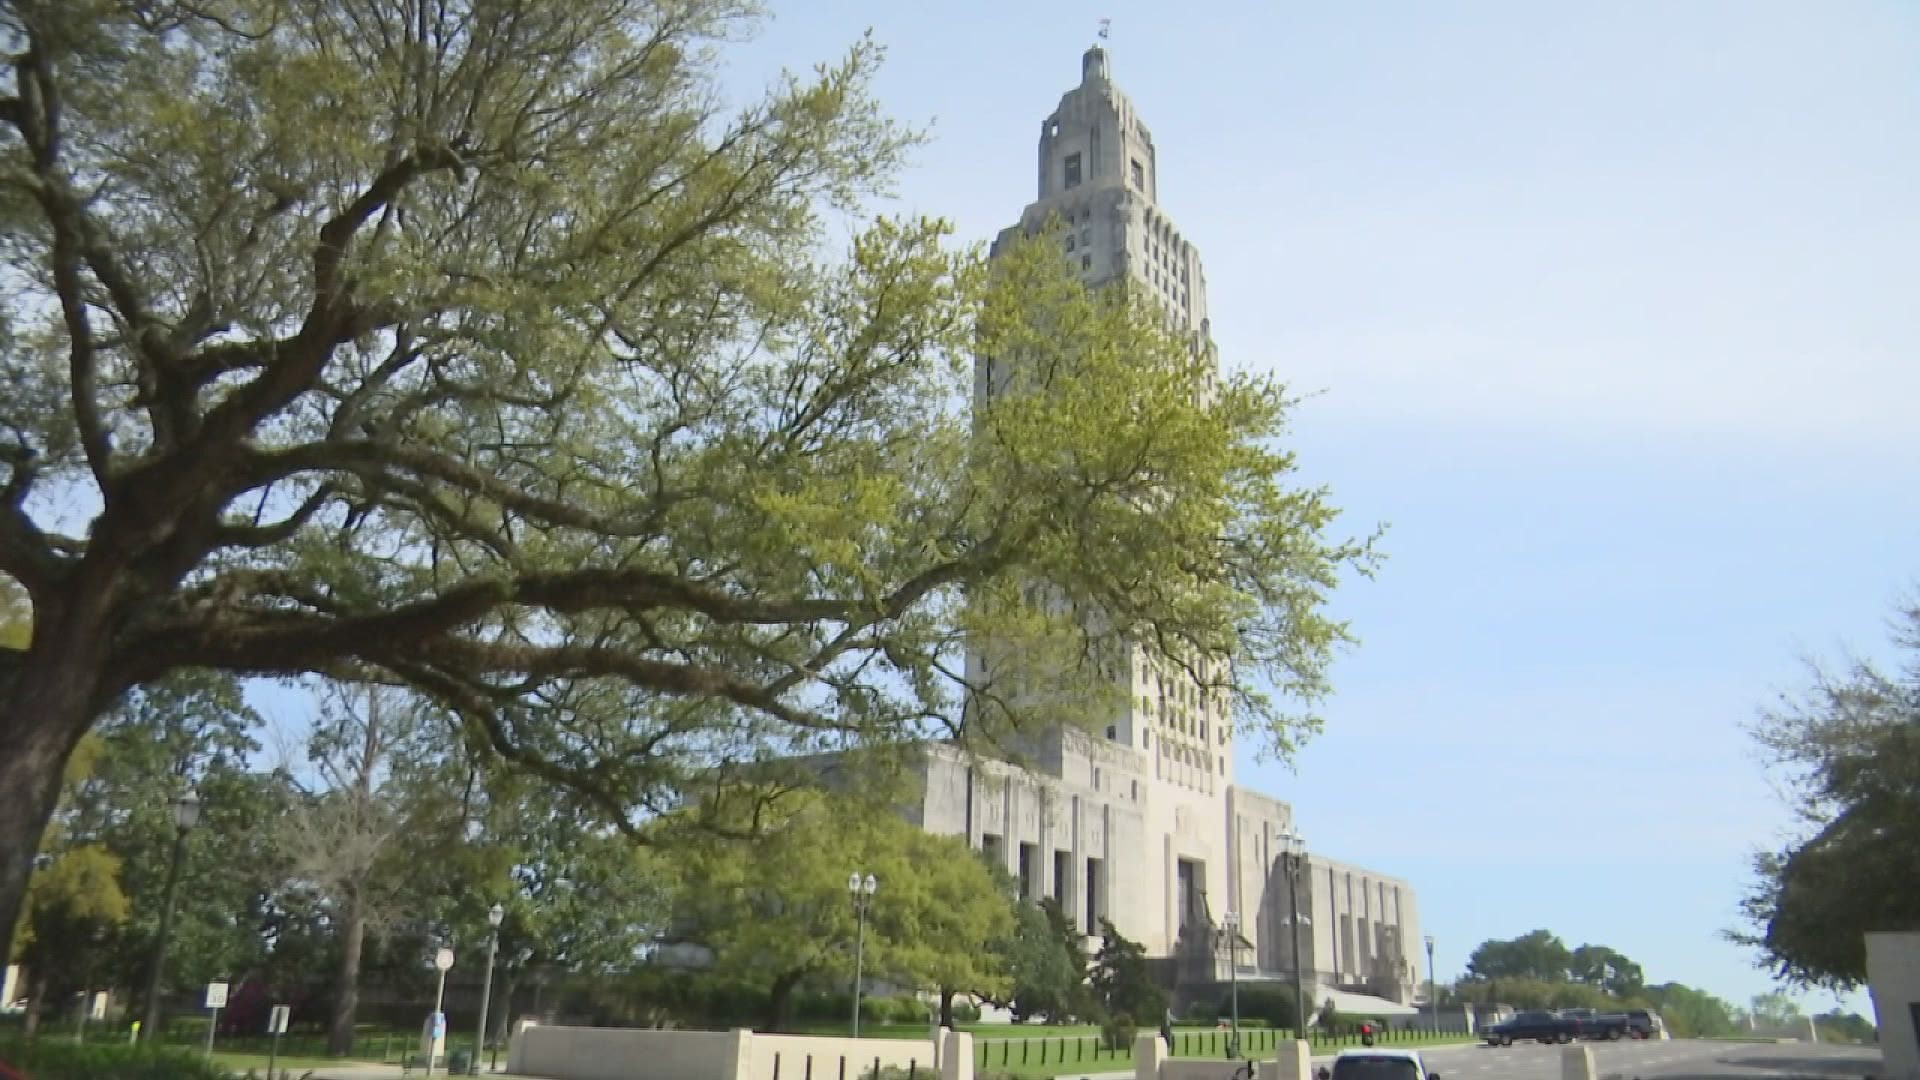 For the first time in a long time, lawmakers will return to the capitol in Baton Rouge for a veto session. Two major bills are expected to be vetoed by the governor.